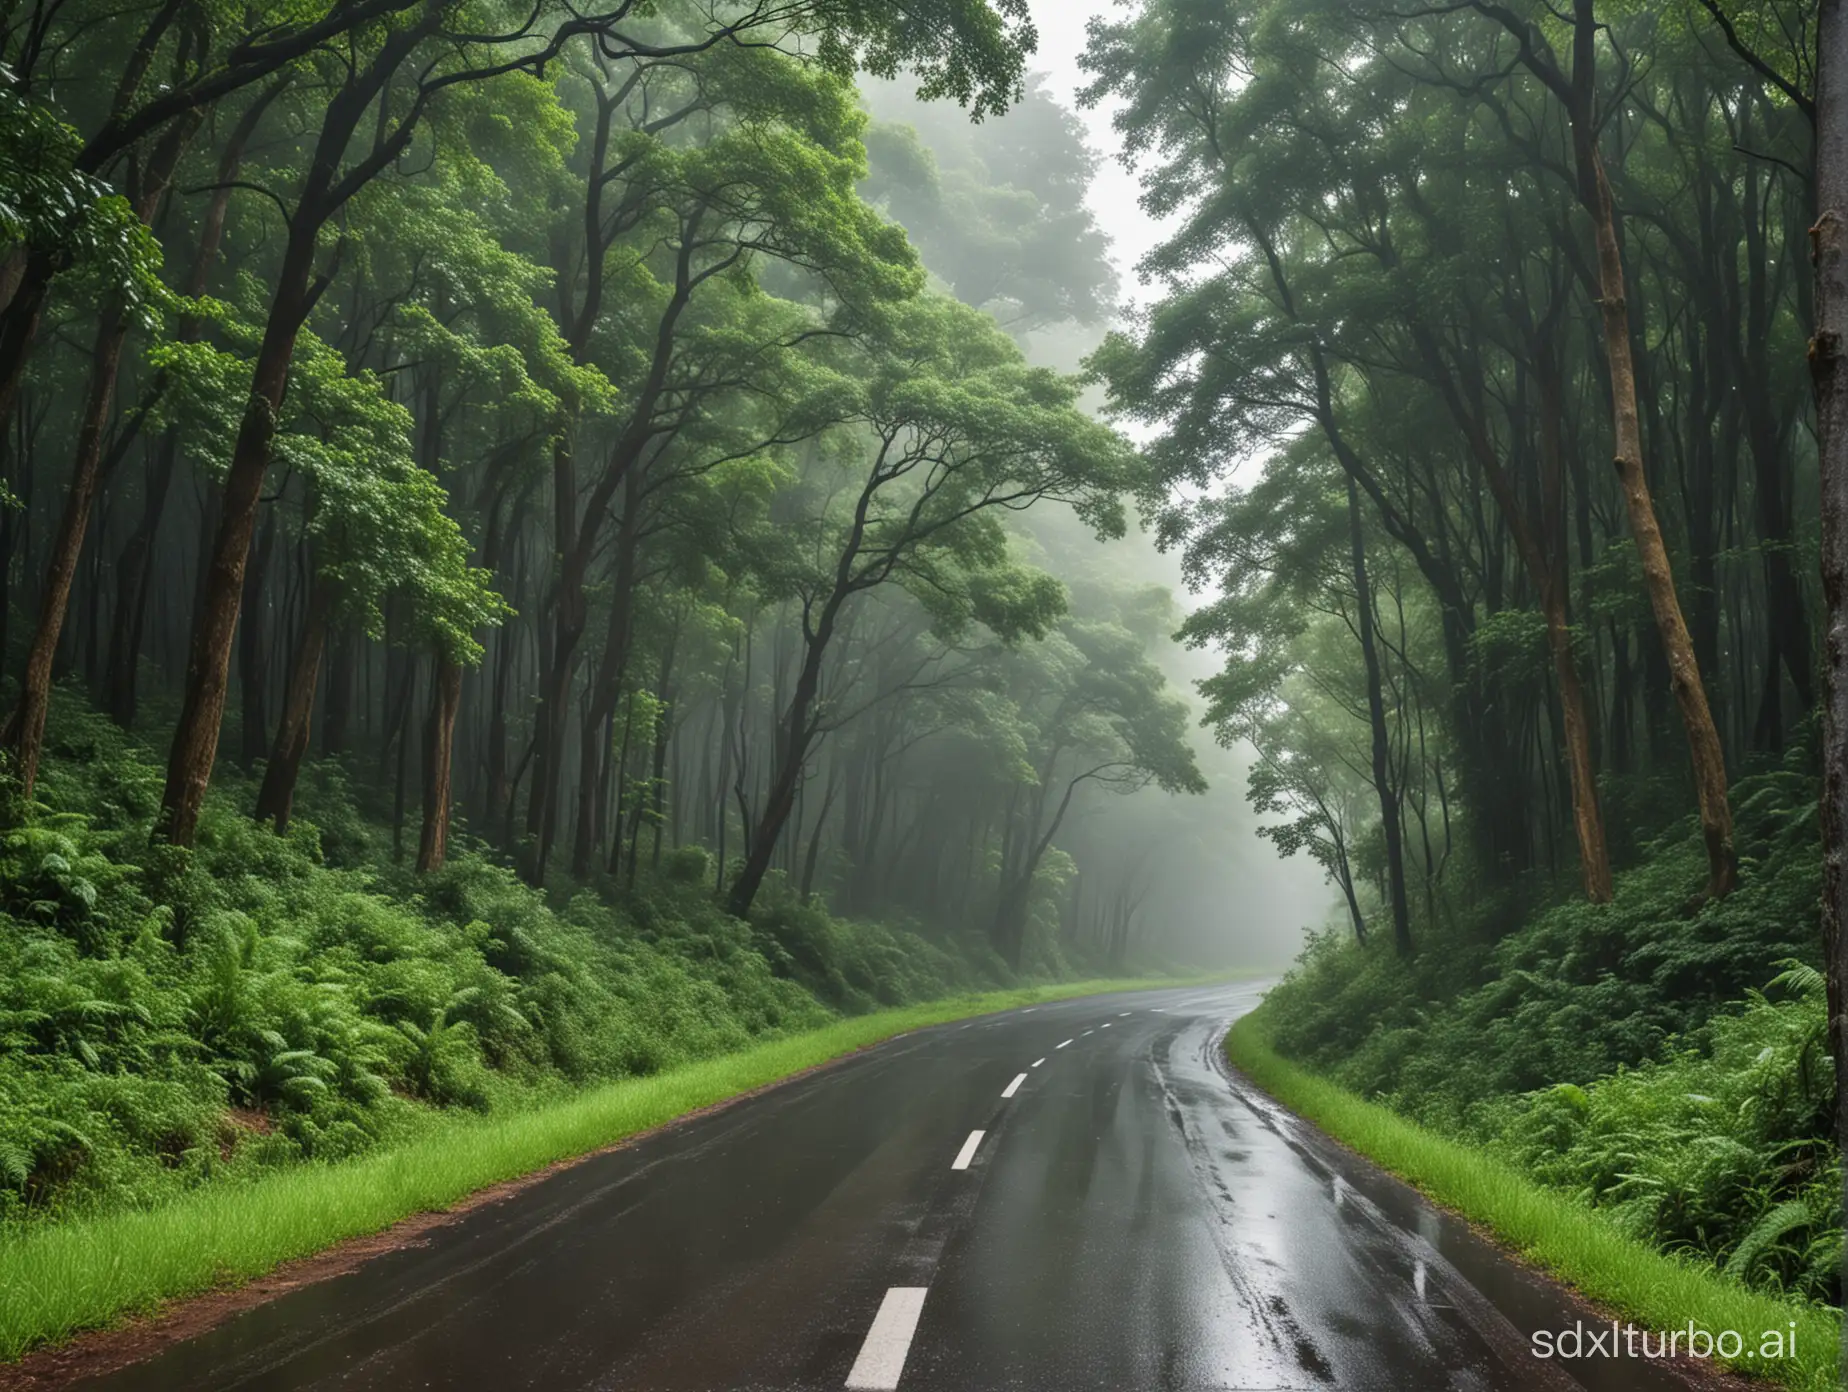 a scenic view of a road in a lush green forest after the rain